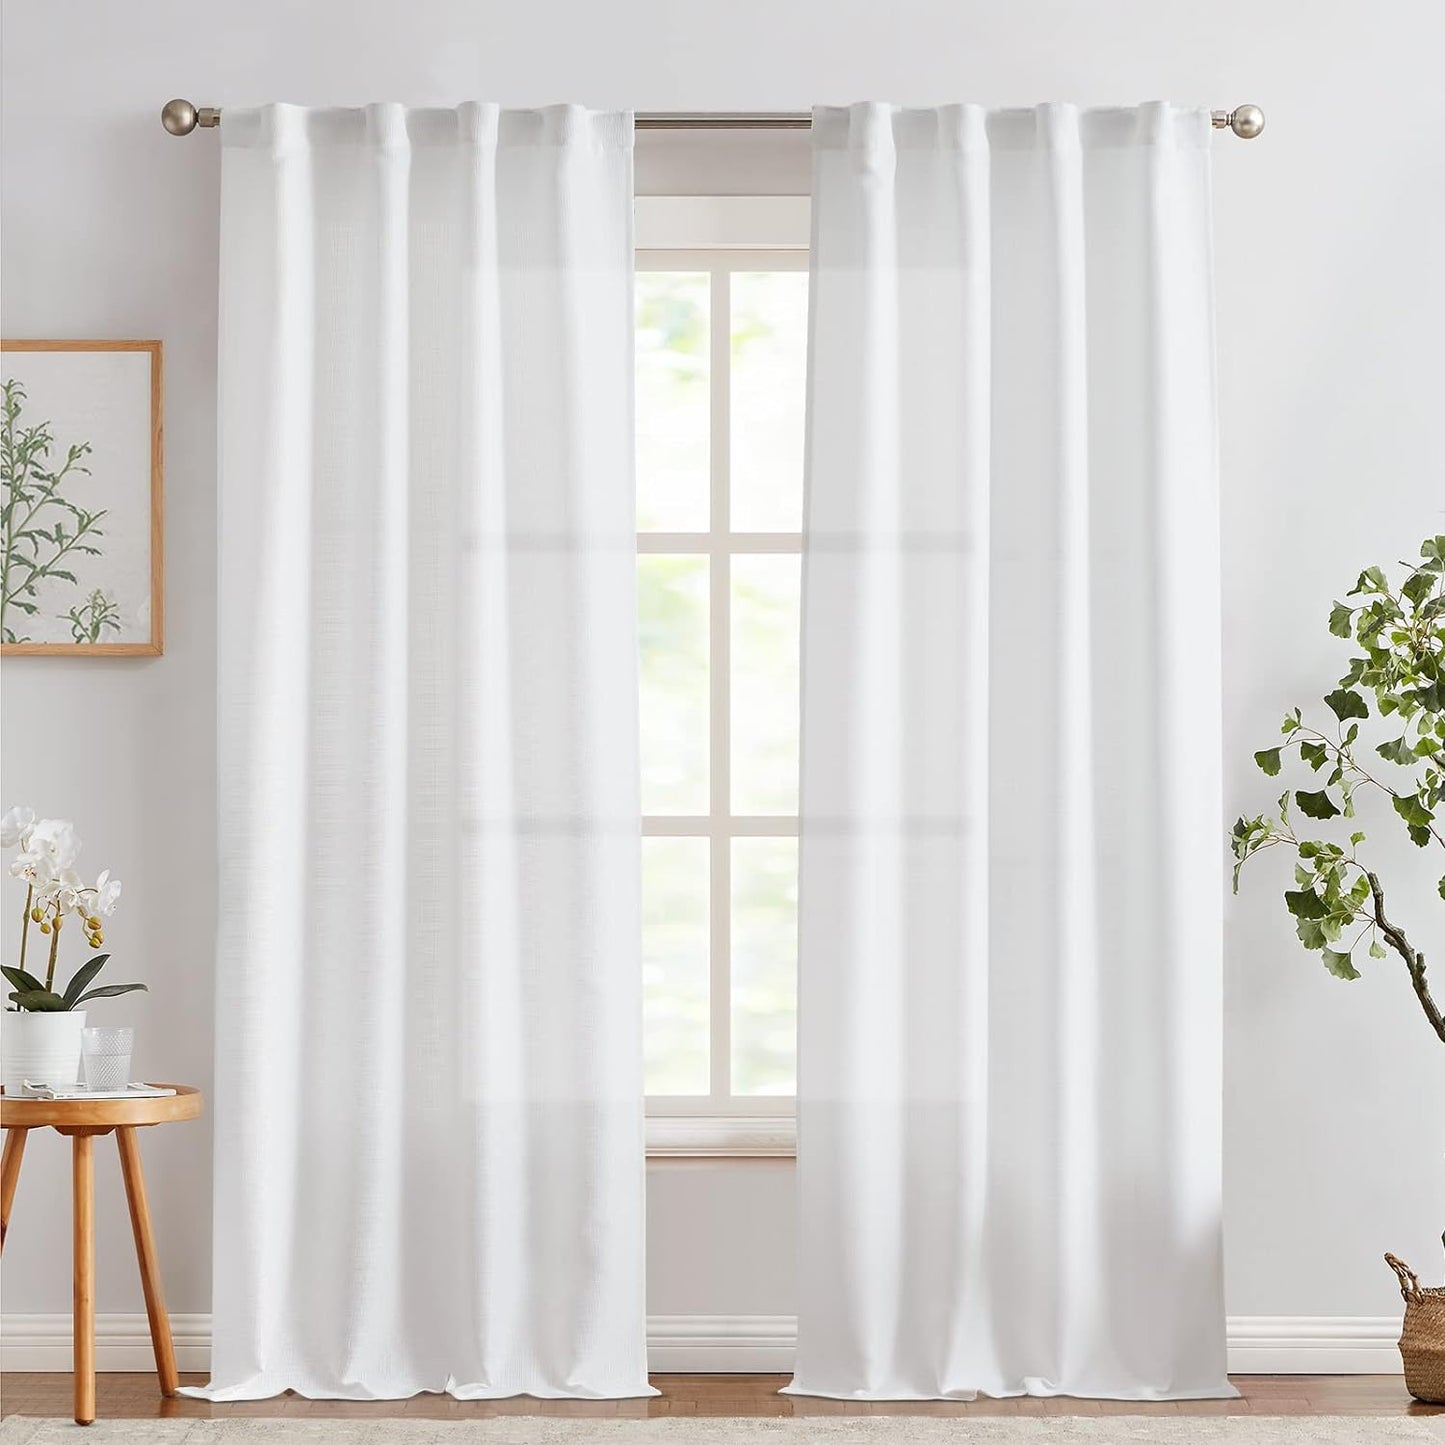 COLLACT White Linen Textured Curtains 84 Inch Length 2 Panels for Living Room Casual Weave Light Filtering Semi Sheer Curtains & Drapes for Bedroom Grommet Top Window Treatments, W38 X L84, White  COLLACT Rod Pocket | Textured White W38 X L96 